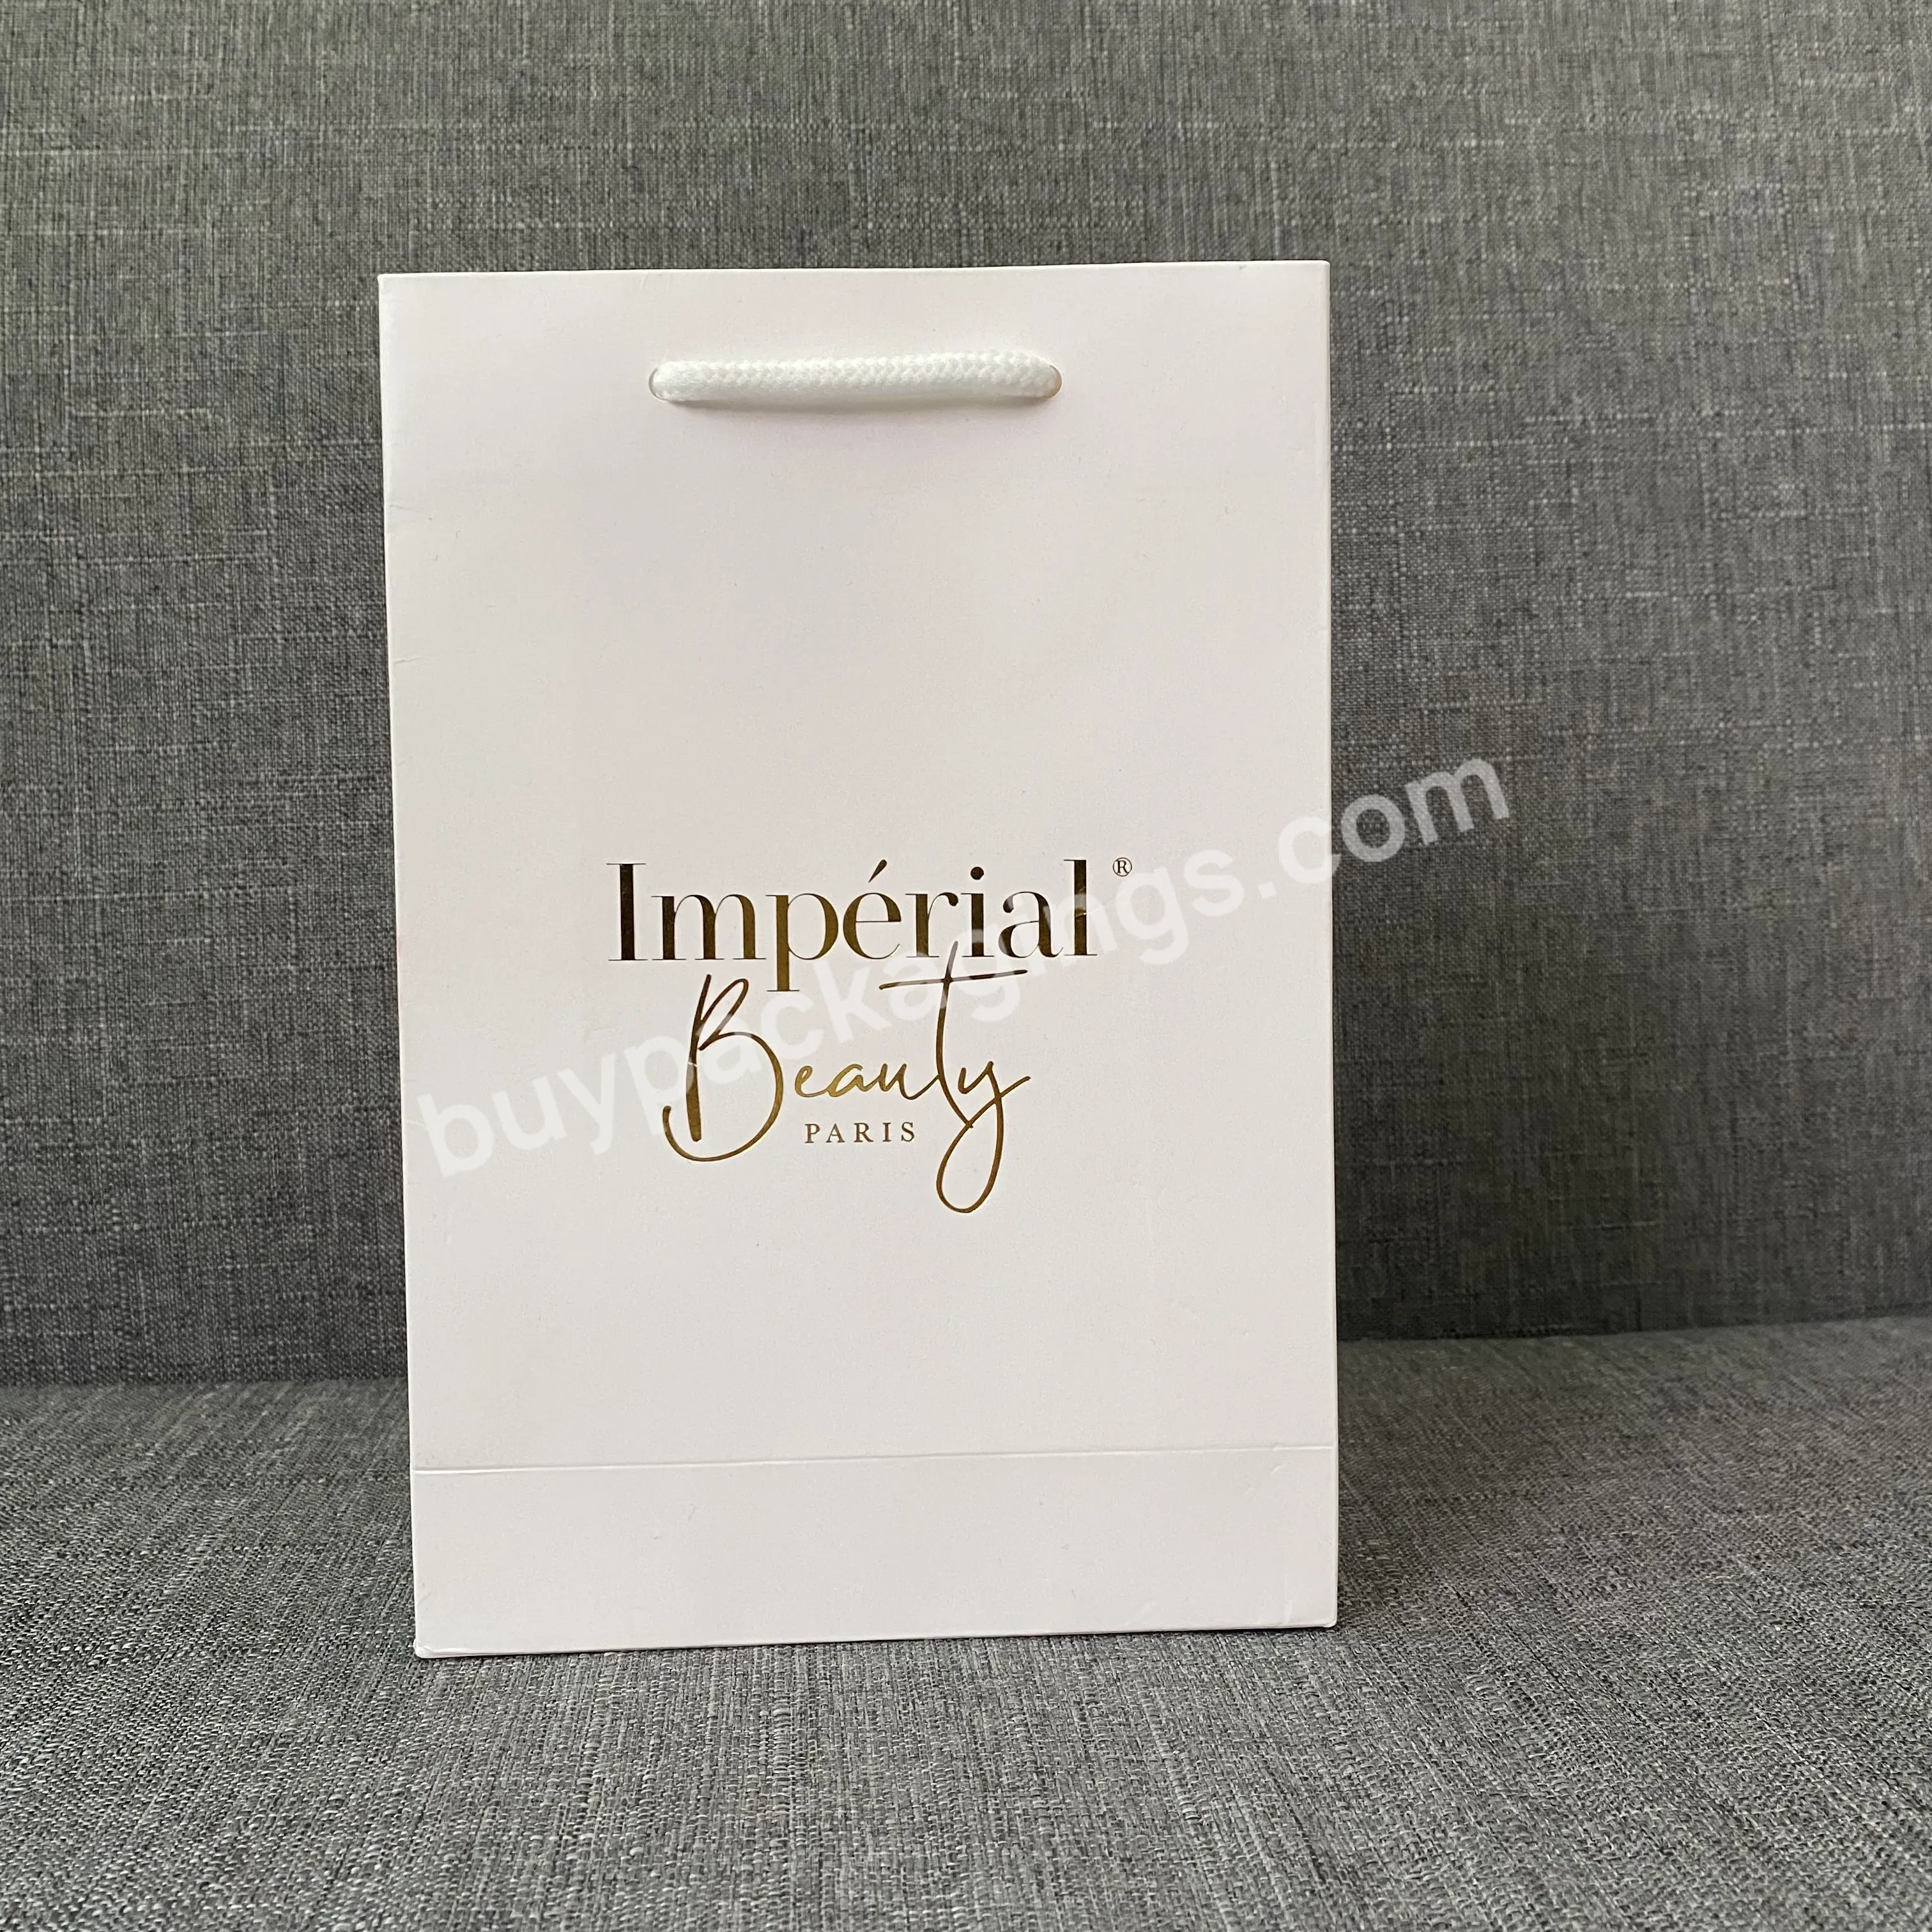 Wholesale Wax Coated Paper Bags,Carter Paper Bag,Paper Roll Bags